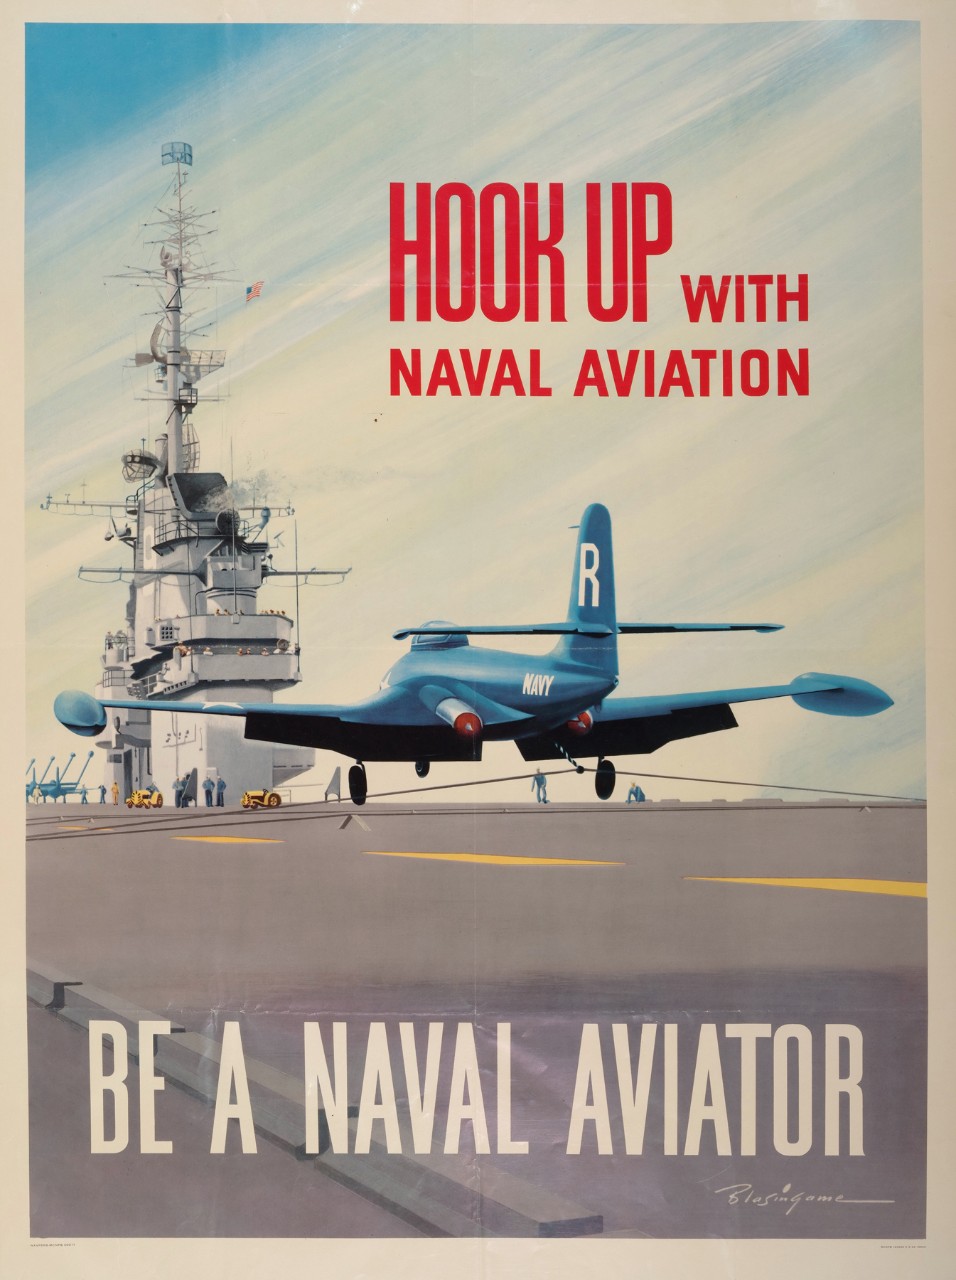 An airplane is hooking the wire while landing on the deck of an aircraft carrier. Text to the right is Hook Up With Naval Aviation and below is Be A Naval Aviator.